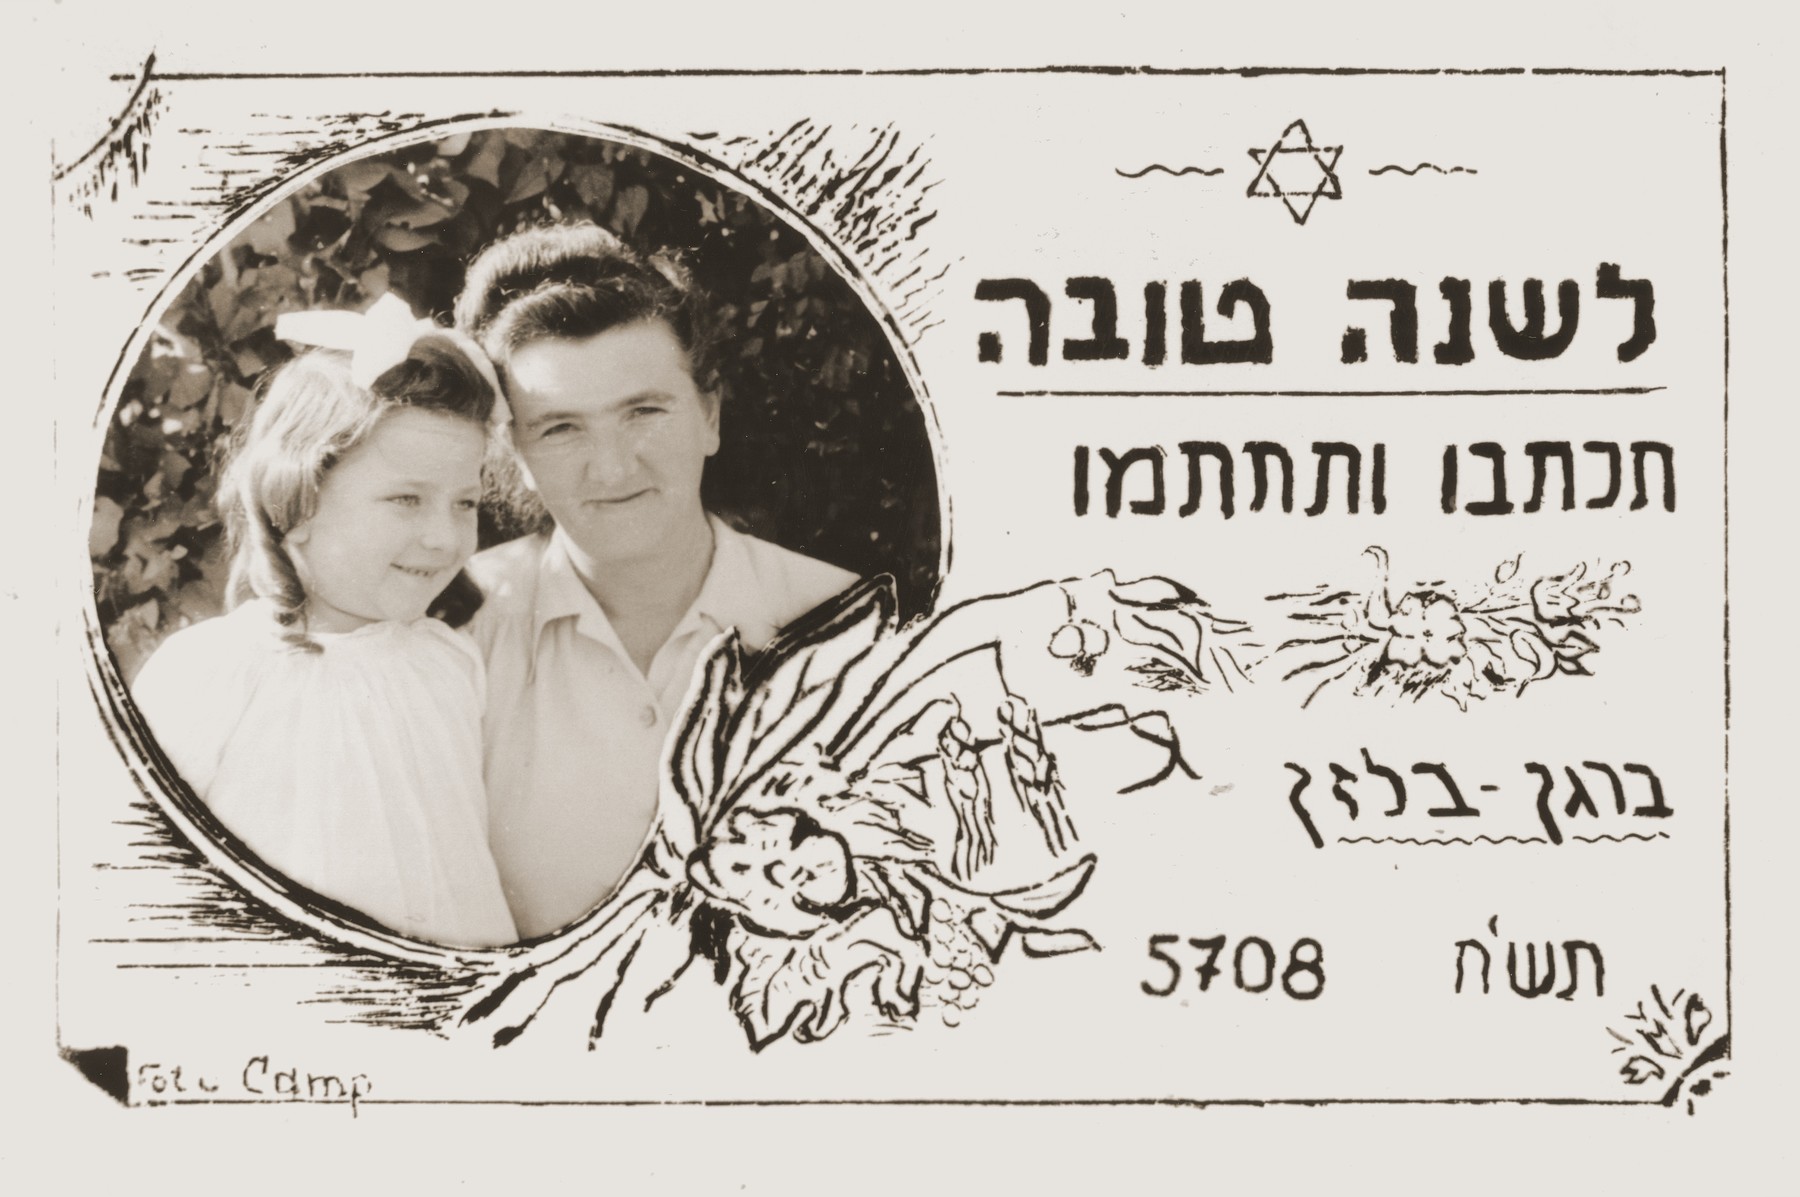 A Jewish New Year card from the Belsen DP camp with photographs of Dora and Stefa Friedfertig.